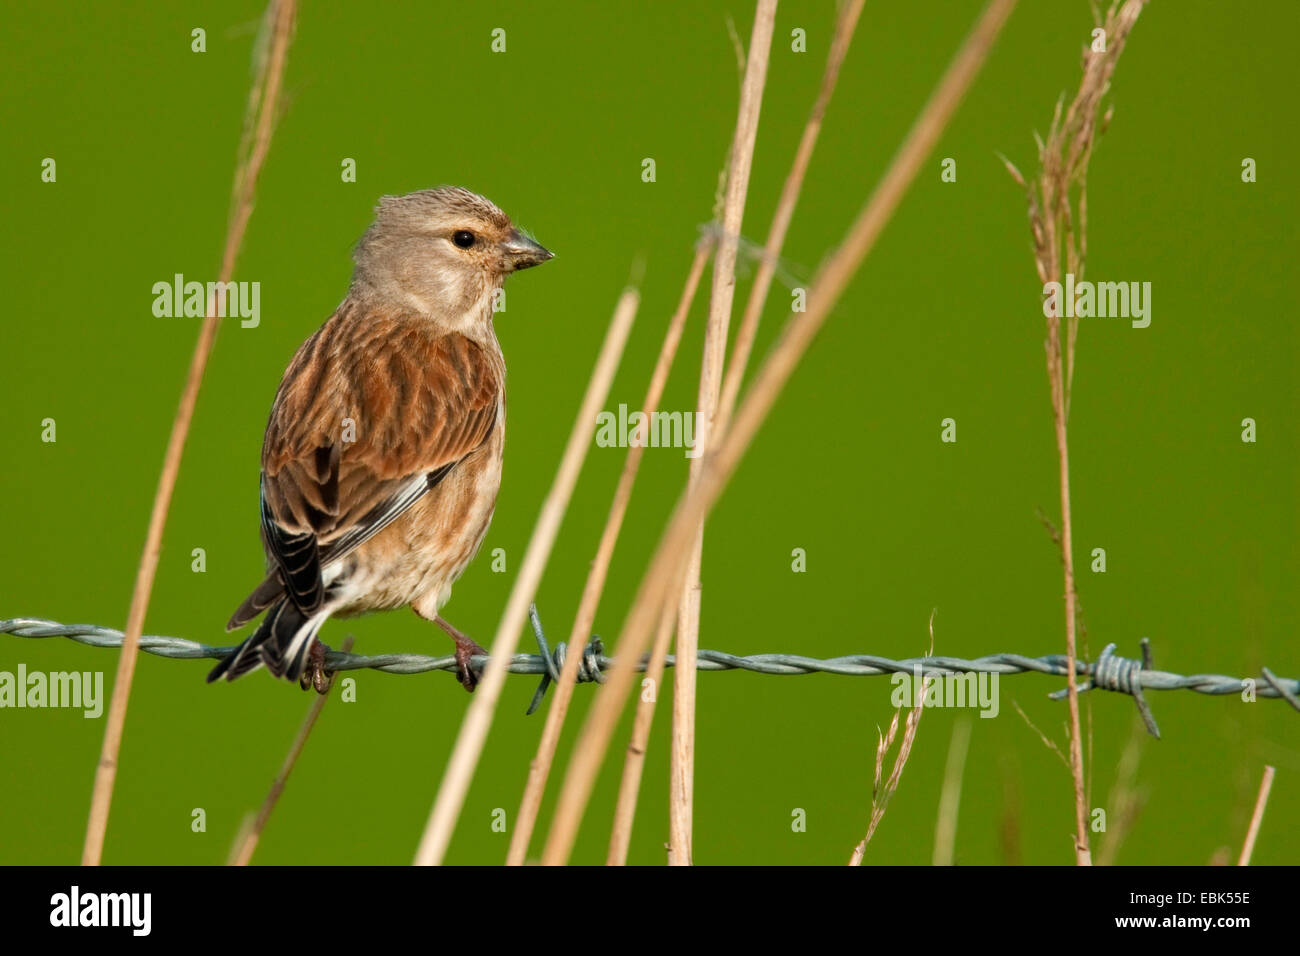 (Carduelis cannabina linnet, Acanthis cannabina), assis sur un barbwire, Pays-Bas, Texel Banque D'Images